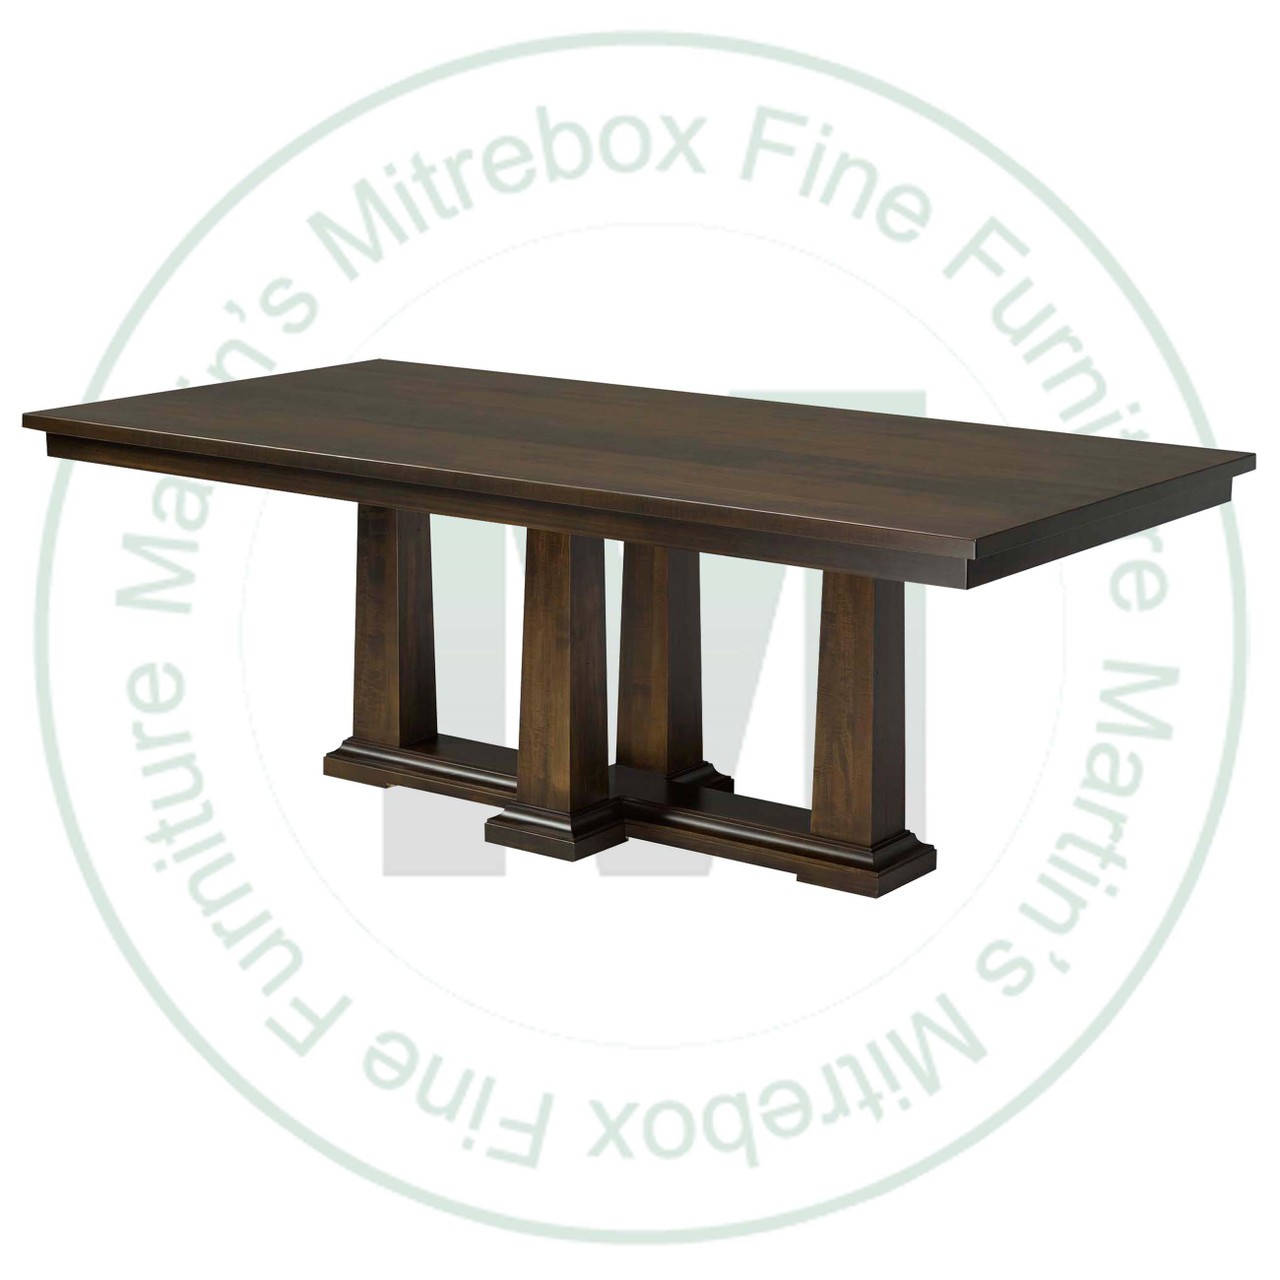 Maple Parthenon Double Pedestal Table 48''D x 96''W x 30''H Solid Top Table Has 1.75'' Thick Top